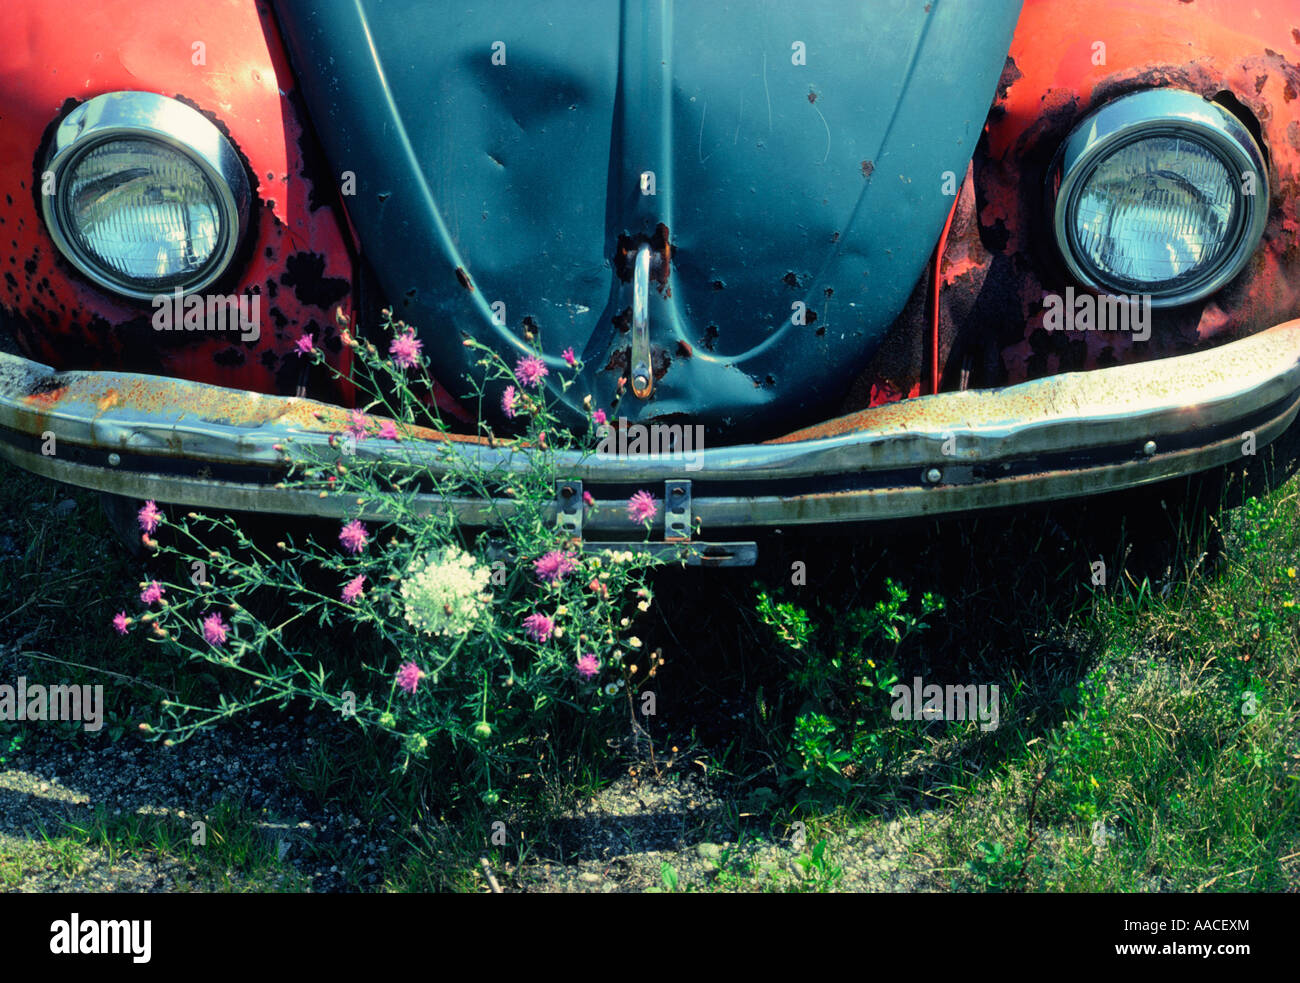 Car cemetery old red and blue Volkswagon Beetle automobile abandoned. Automobile junkyard. Wildflowers Stock Photo